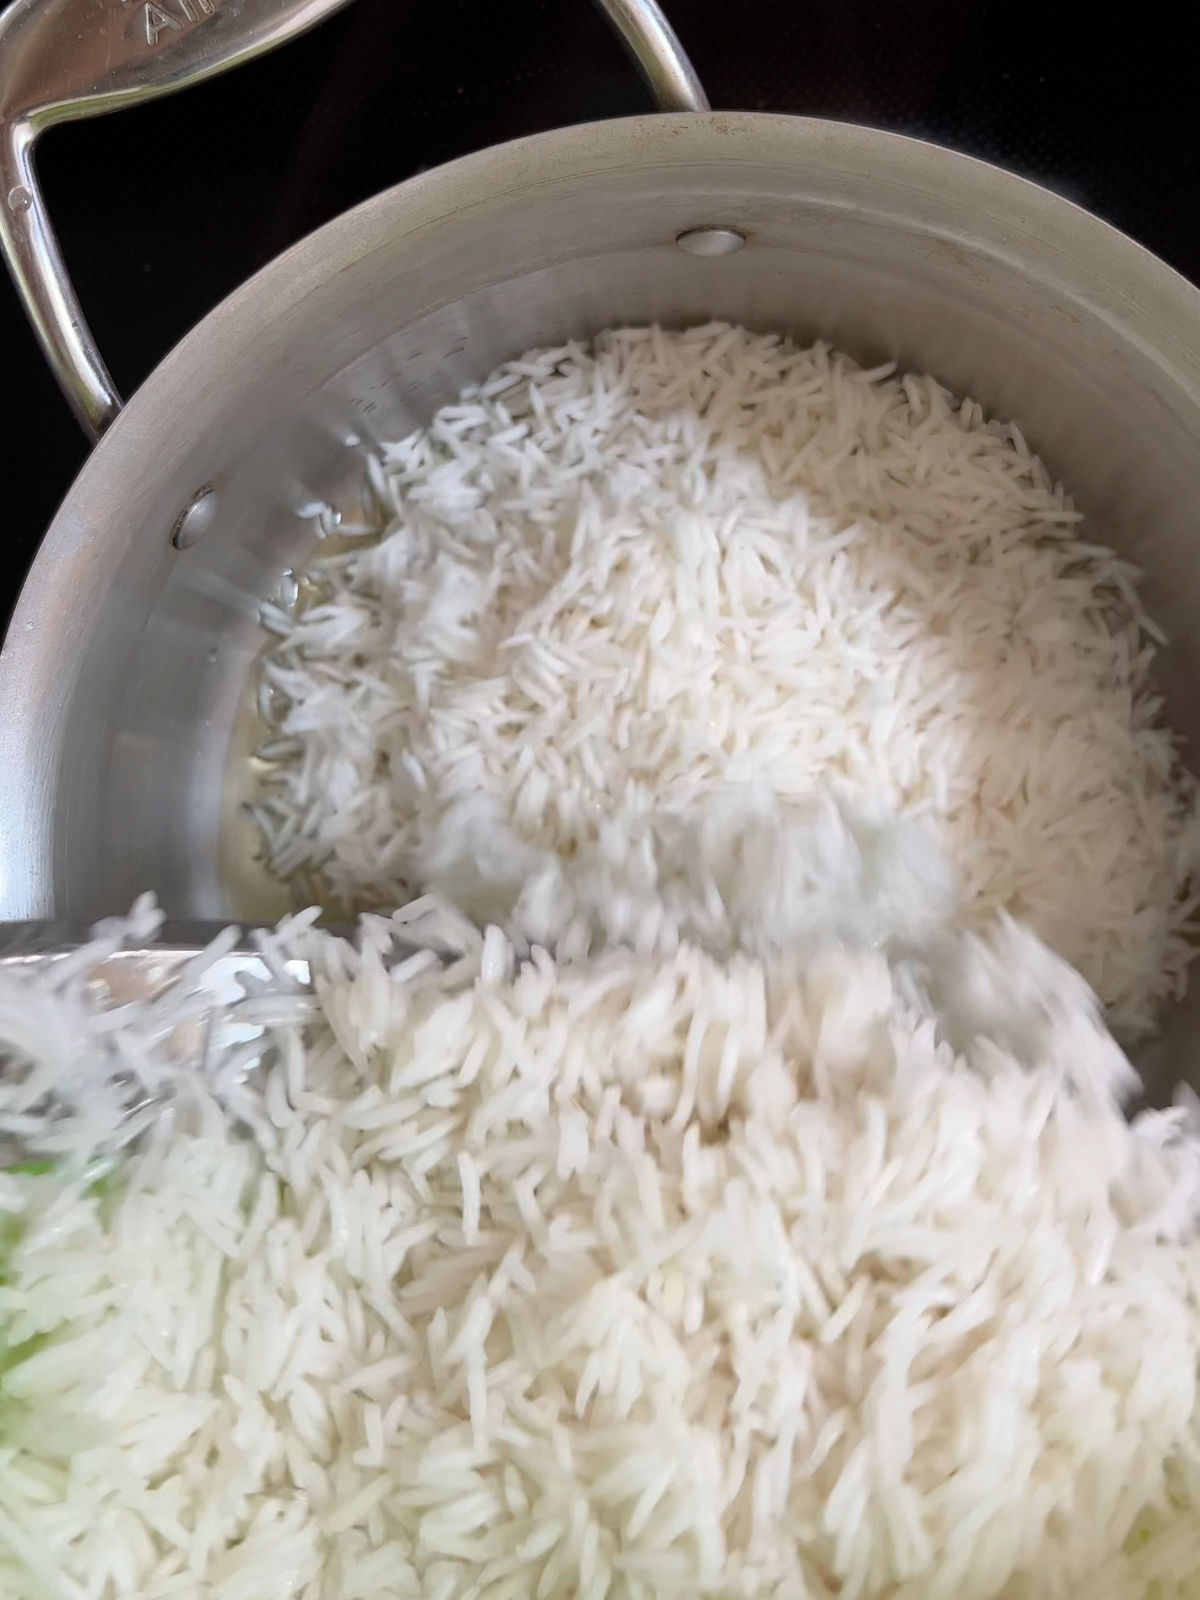 Pouring rice into a metal pot on a black stove.